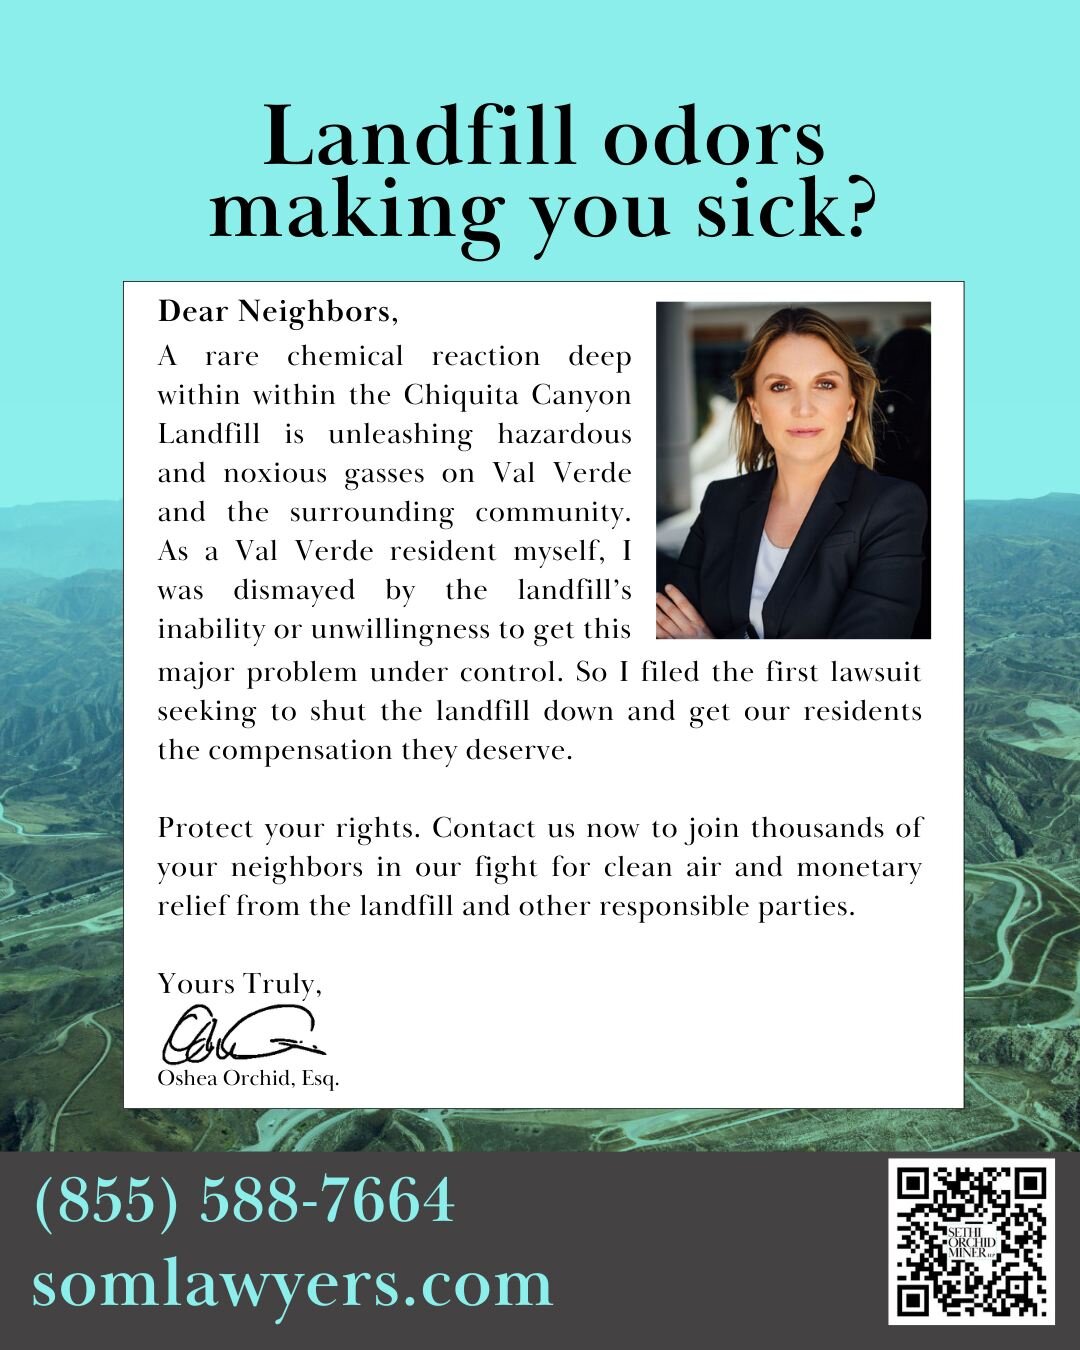 Join thousands of your neighbors in the first litigation seeking to actively shut the landfill down and get you compensation.